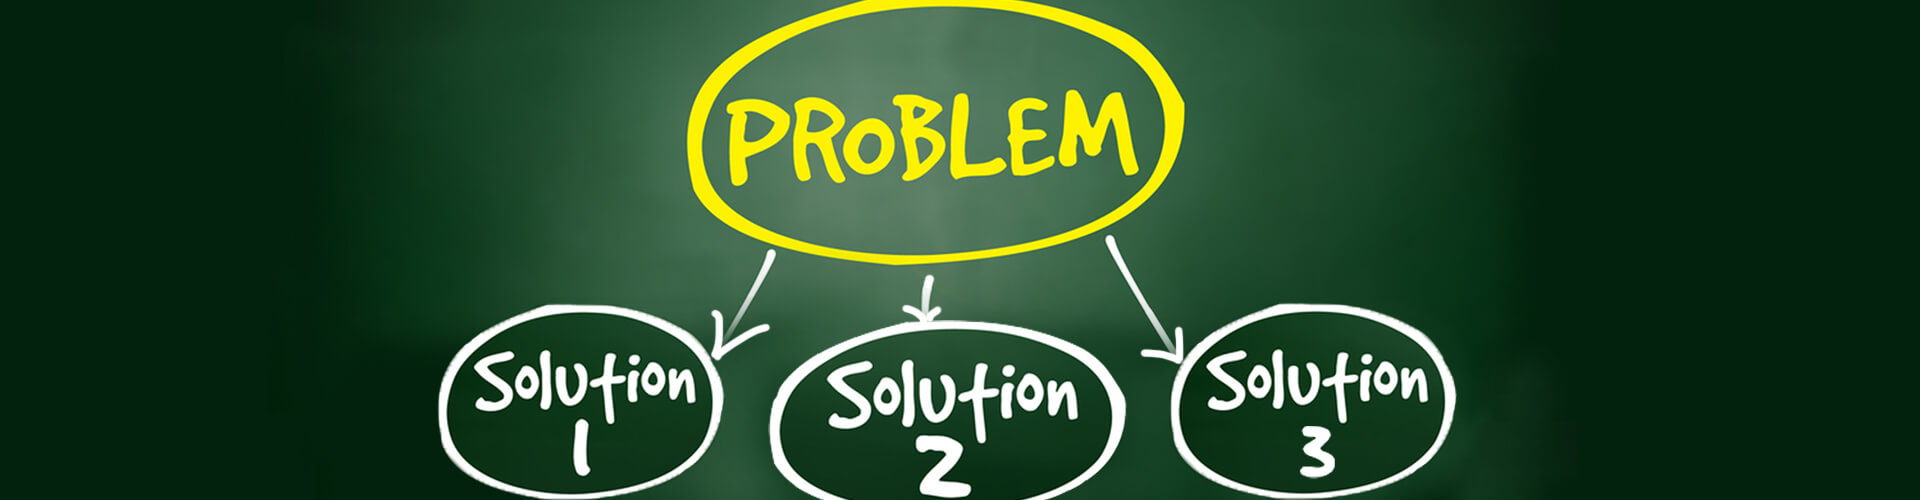 how many steps are there in problem solving process